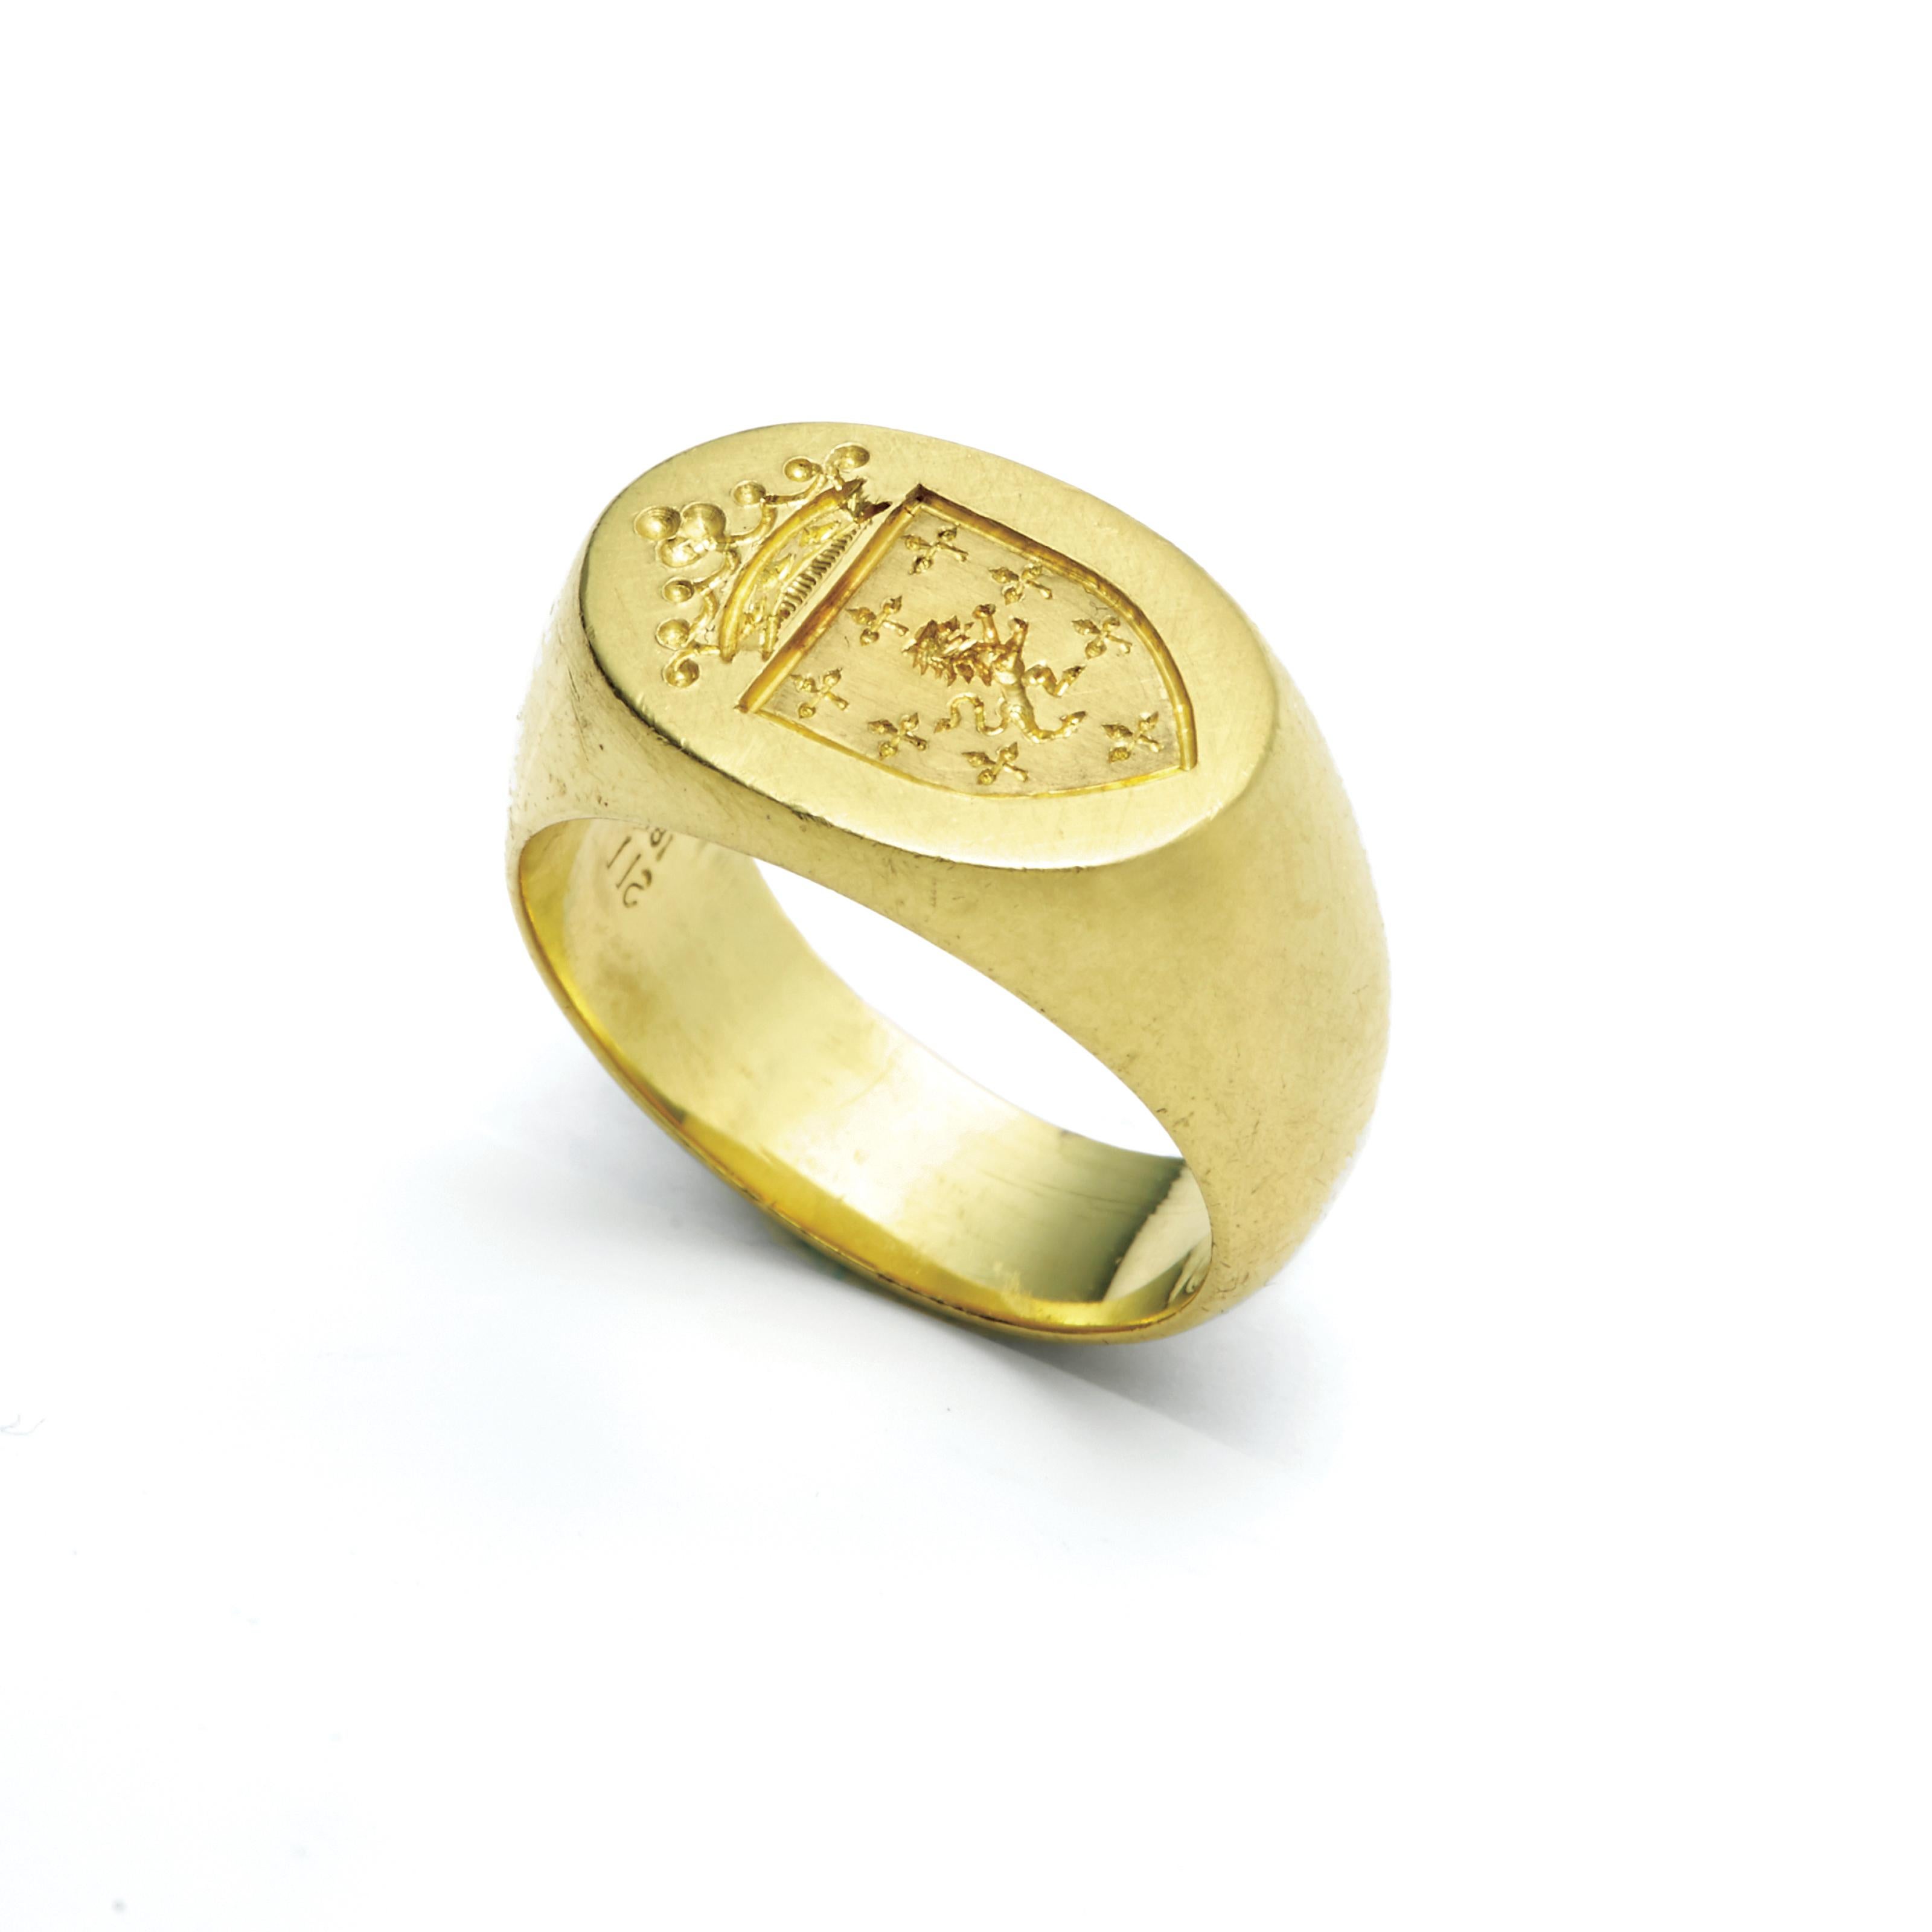 18kt Gold Ashley Oval Signet Ring with Custom-Designed, Hand-Engraved Crest.

Susan Lister Locke’s career as a jewelry artist began with her love of Signet Rings. She has designed each style of her rings to fit any individual. Signet Rings are of